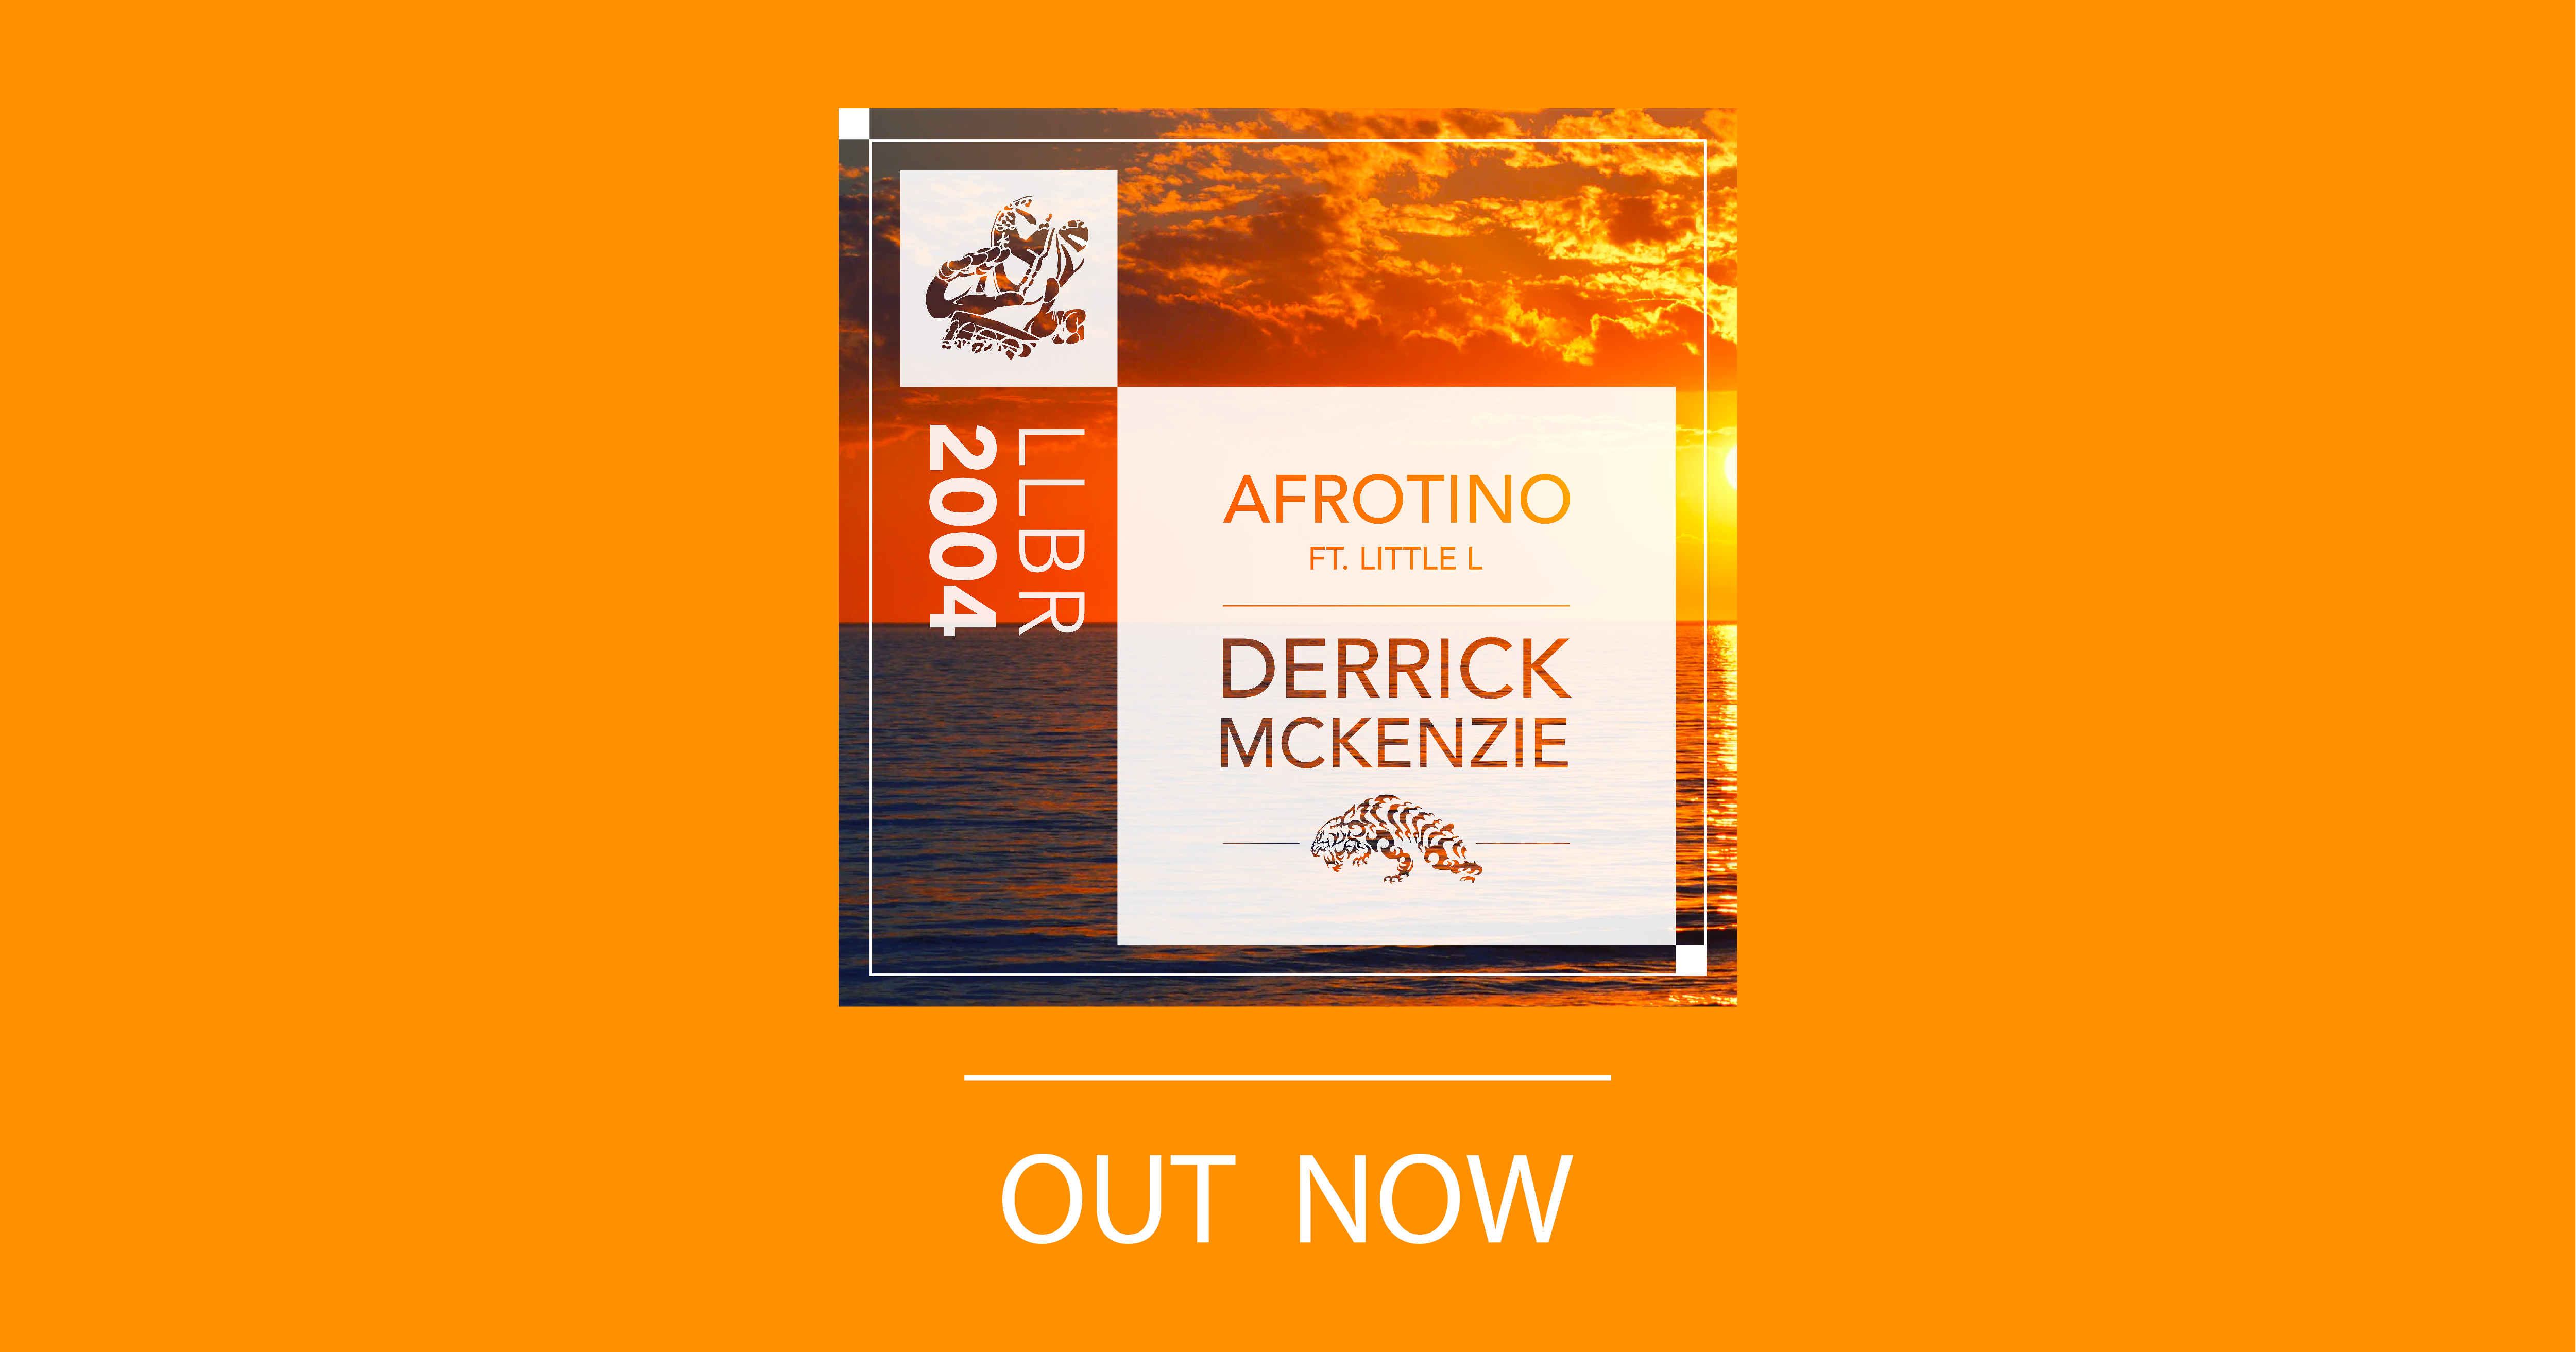 Derrick Mckenzie - Afrotino - OUT NOW - Play / Download